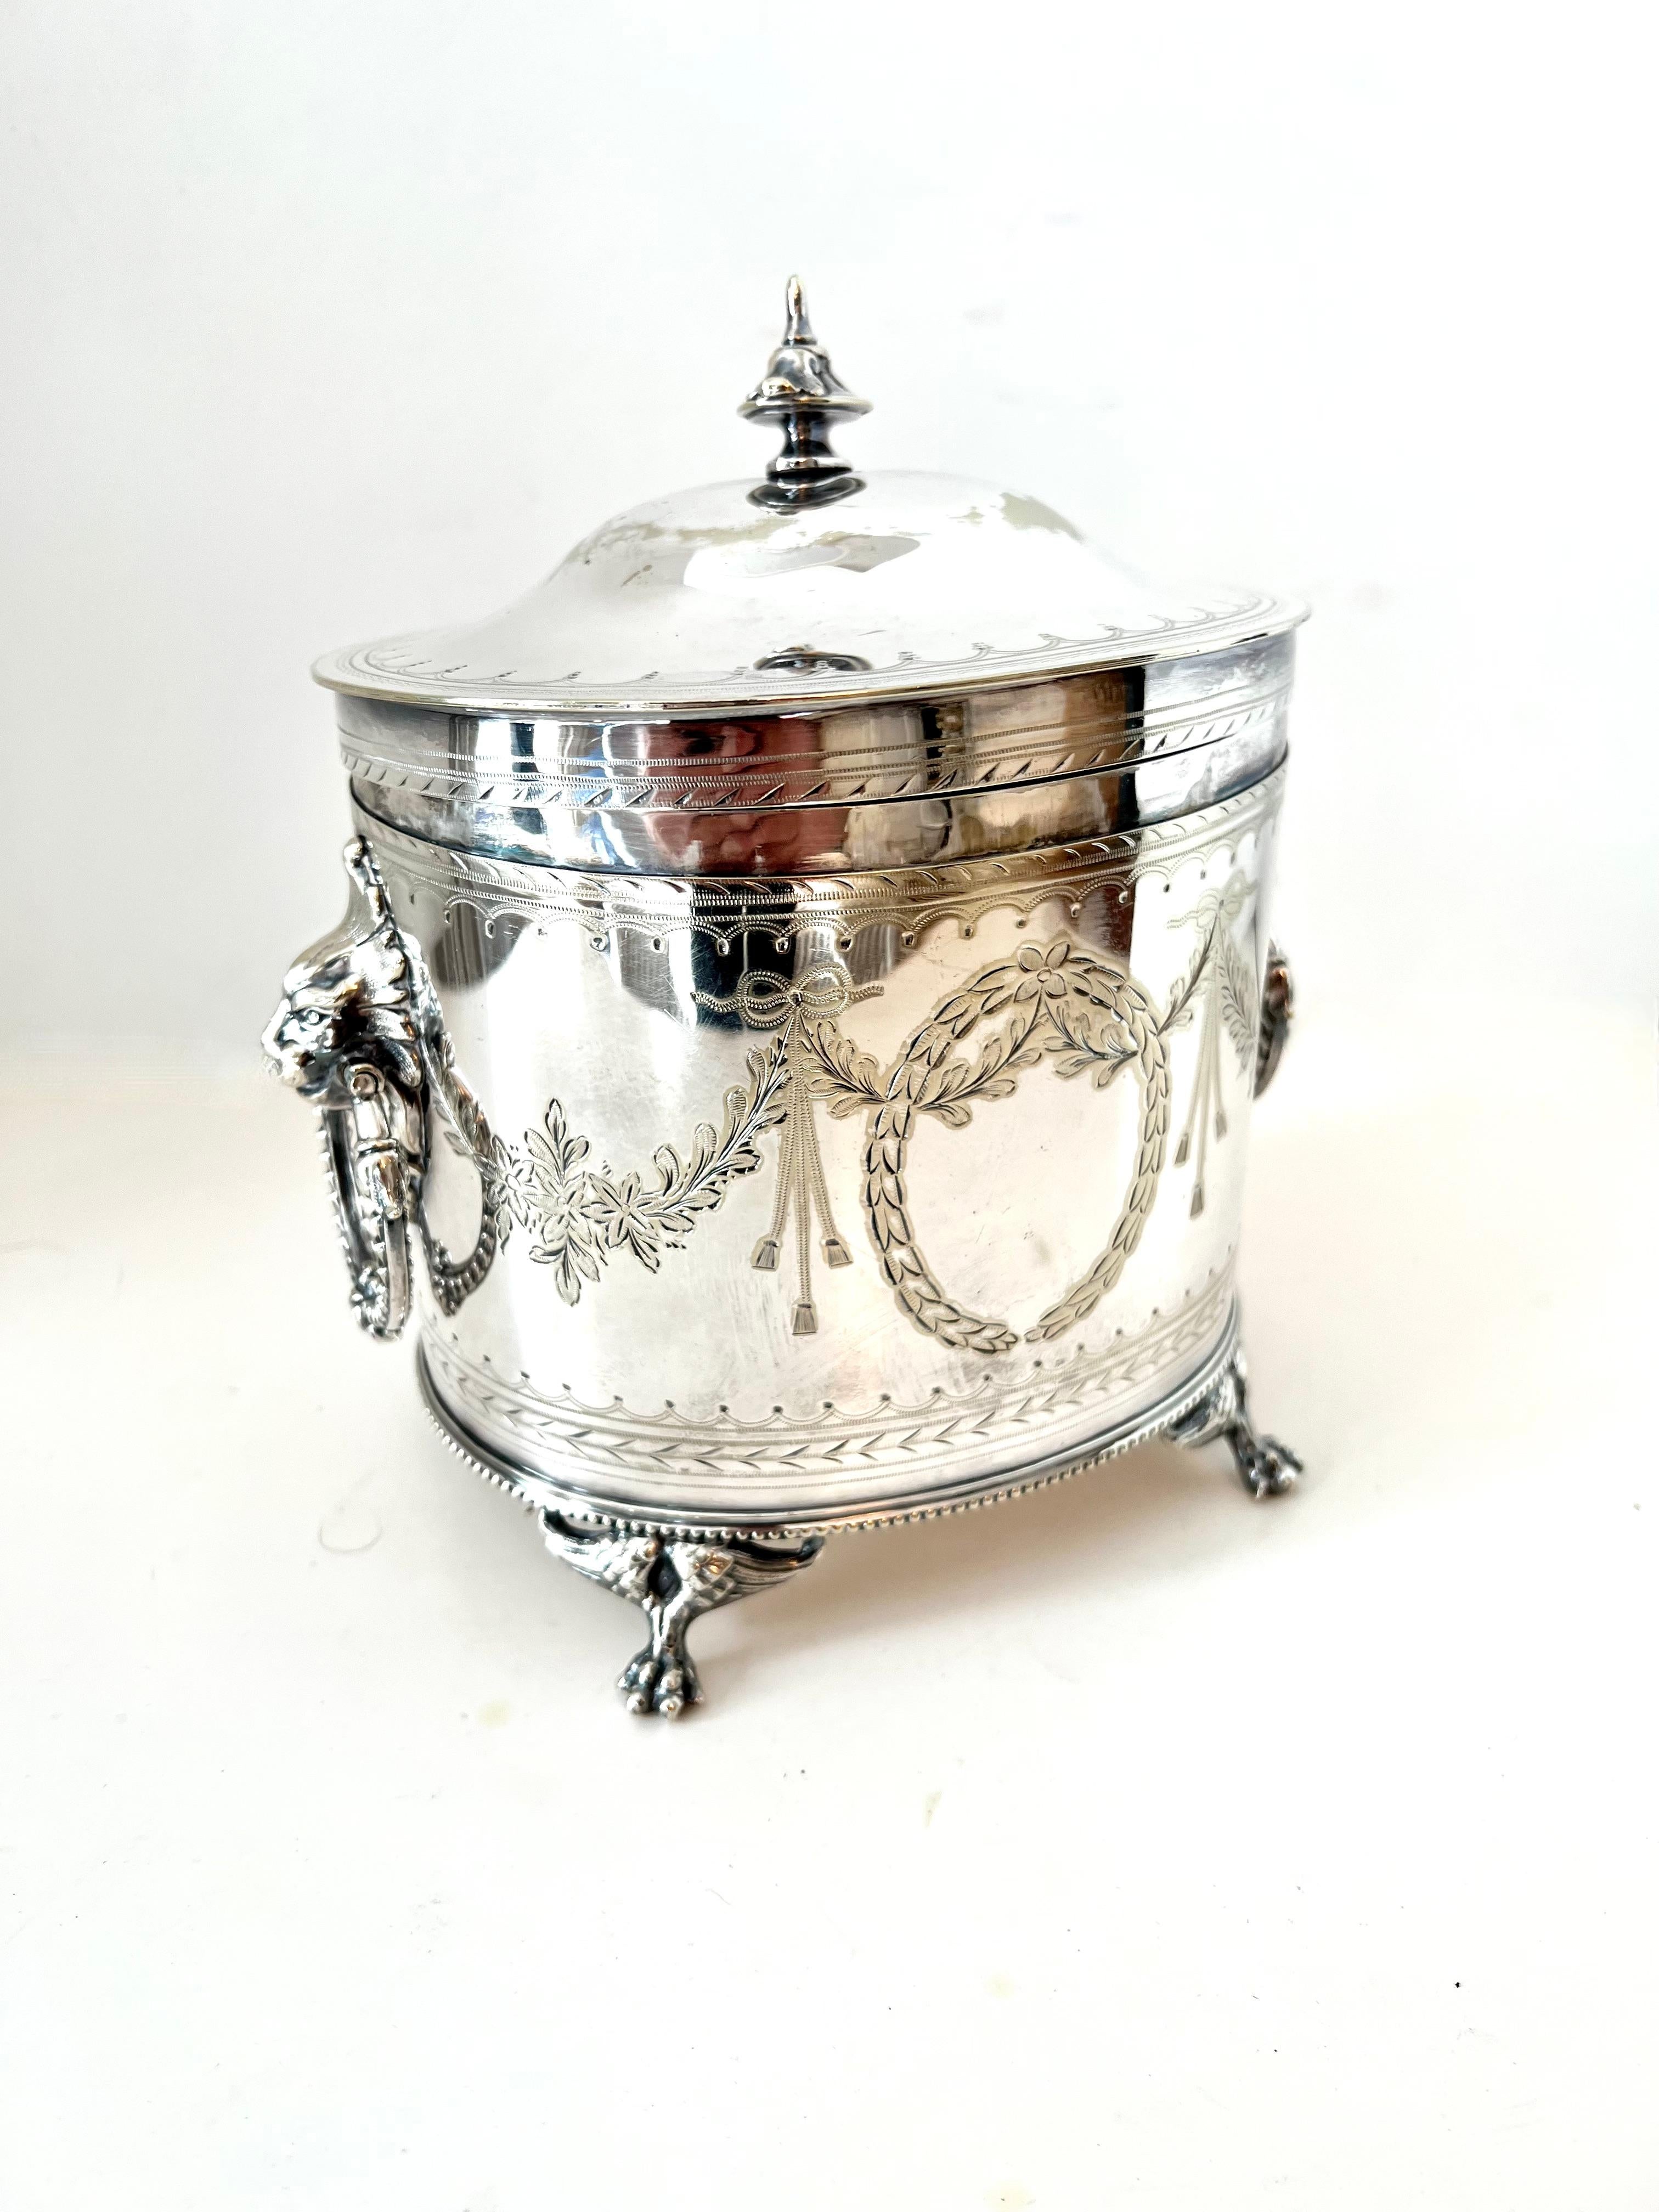 A beautifully designed Silver Plate Tea Caddy with Hinged Lid.

The piece is a compliment to any Tea station, counter, or also works well on a desk or work station, to hold everything from Tea to office supplies.

The English design with Garlands